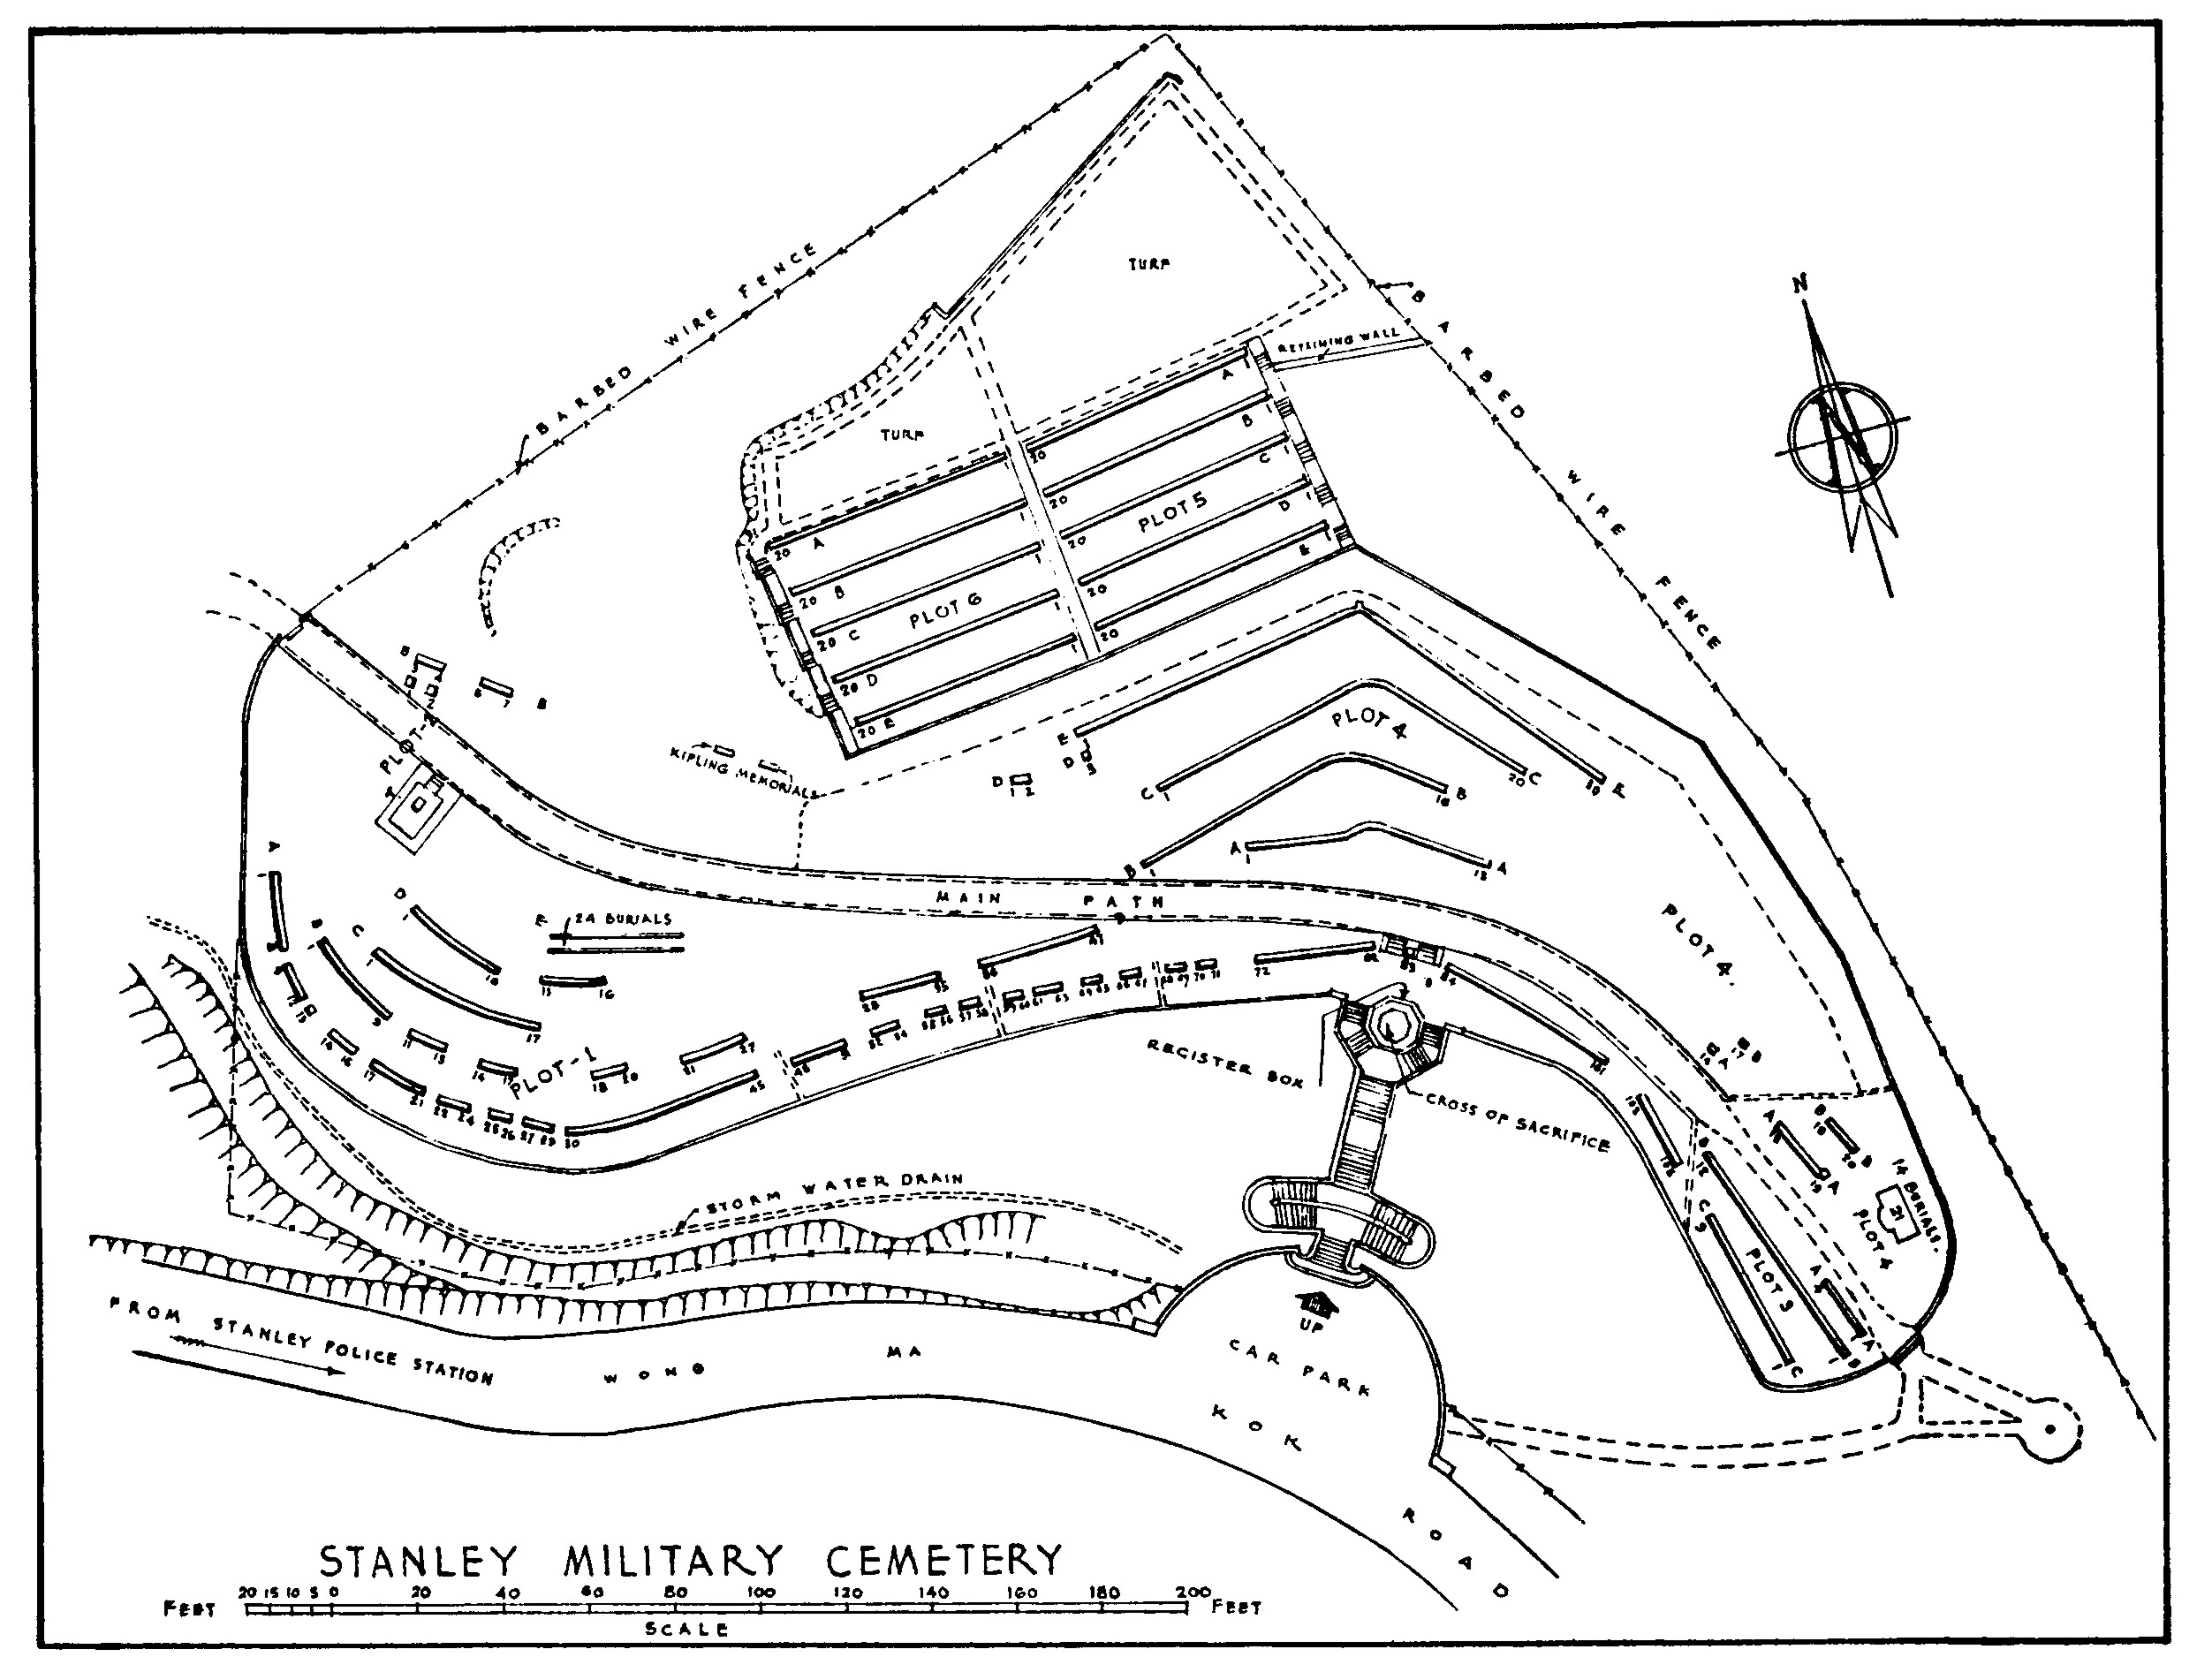 Stanley Military Cemetery Plan